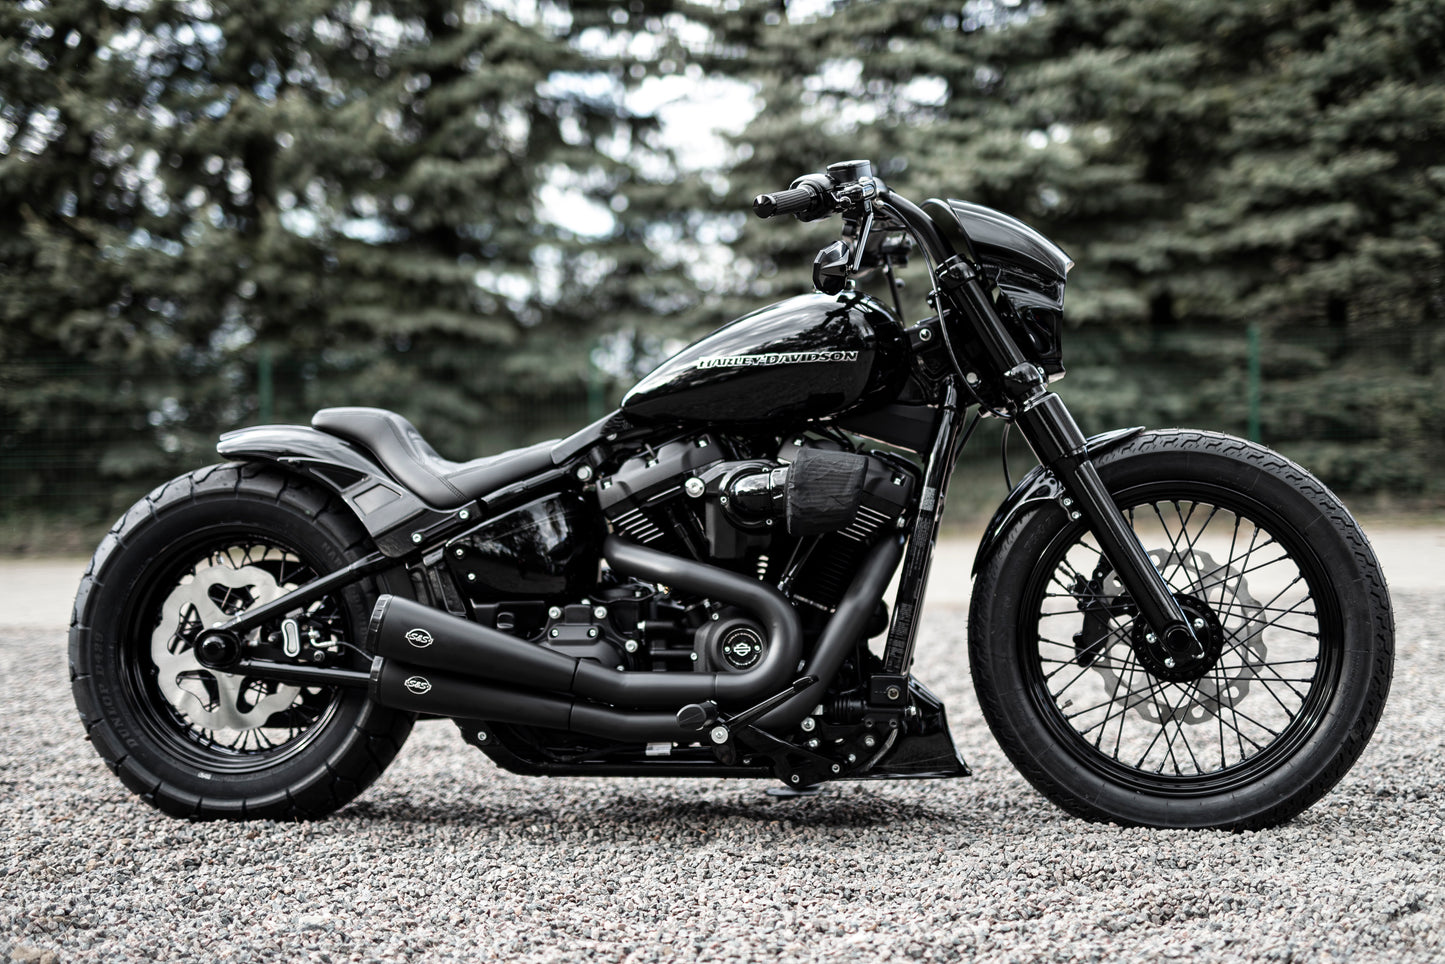 Harley Davidson motorcycle with Killer Custom front fender from the side outside with some trees in the background